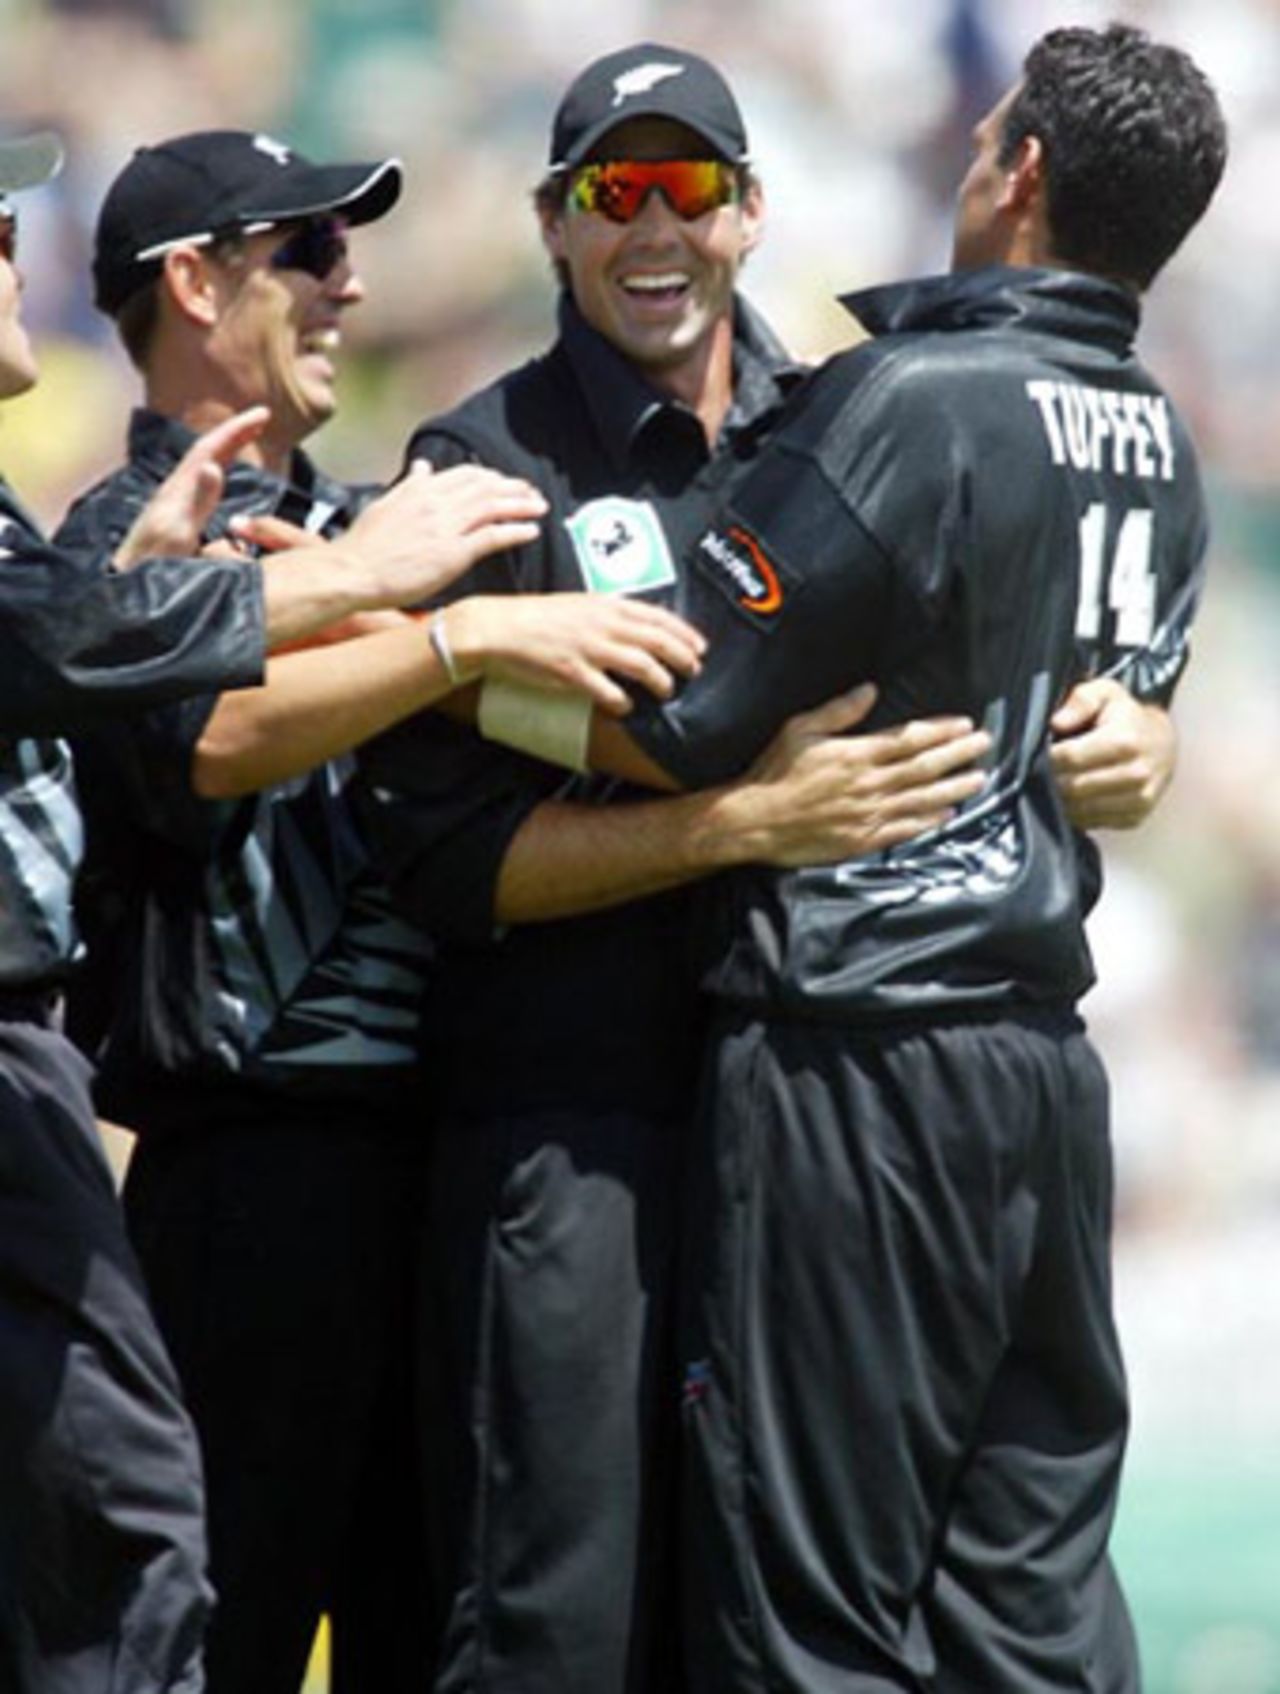 New Zealand players Mathew Sinclair (left), Stephen Fleming and Daryl Tuffey celebrate the dismissal of Indian batsman Dinesh Mongia, caught by Fleming at first slip off the bowling of Tuffey for 0. 7th ODI: New Zealand v India at Westpac Park, Hamilton, 14 January 2003.